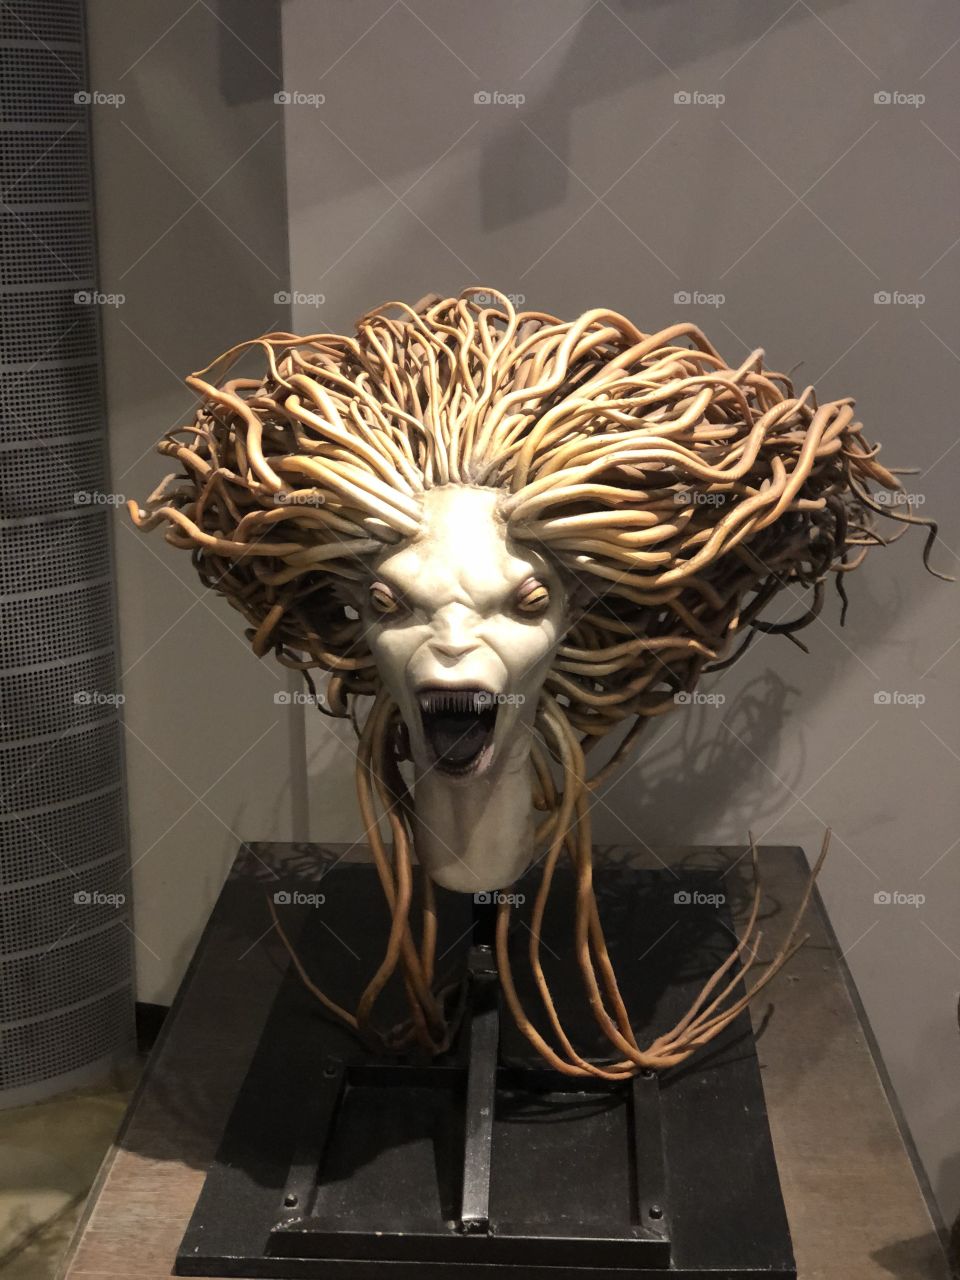 A amazing head design from Harry Potter 